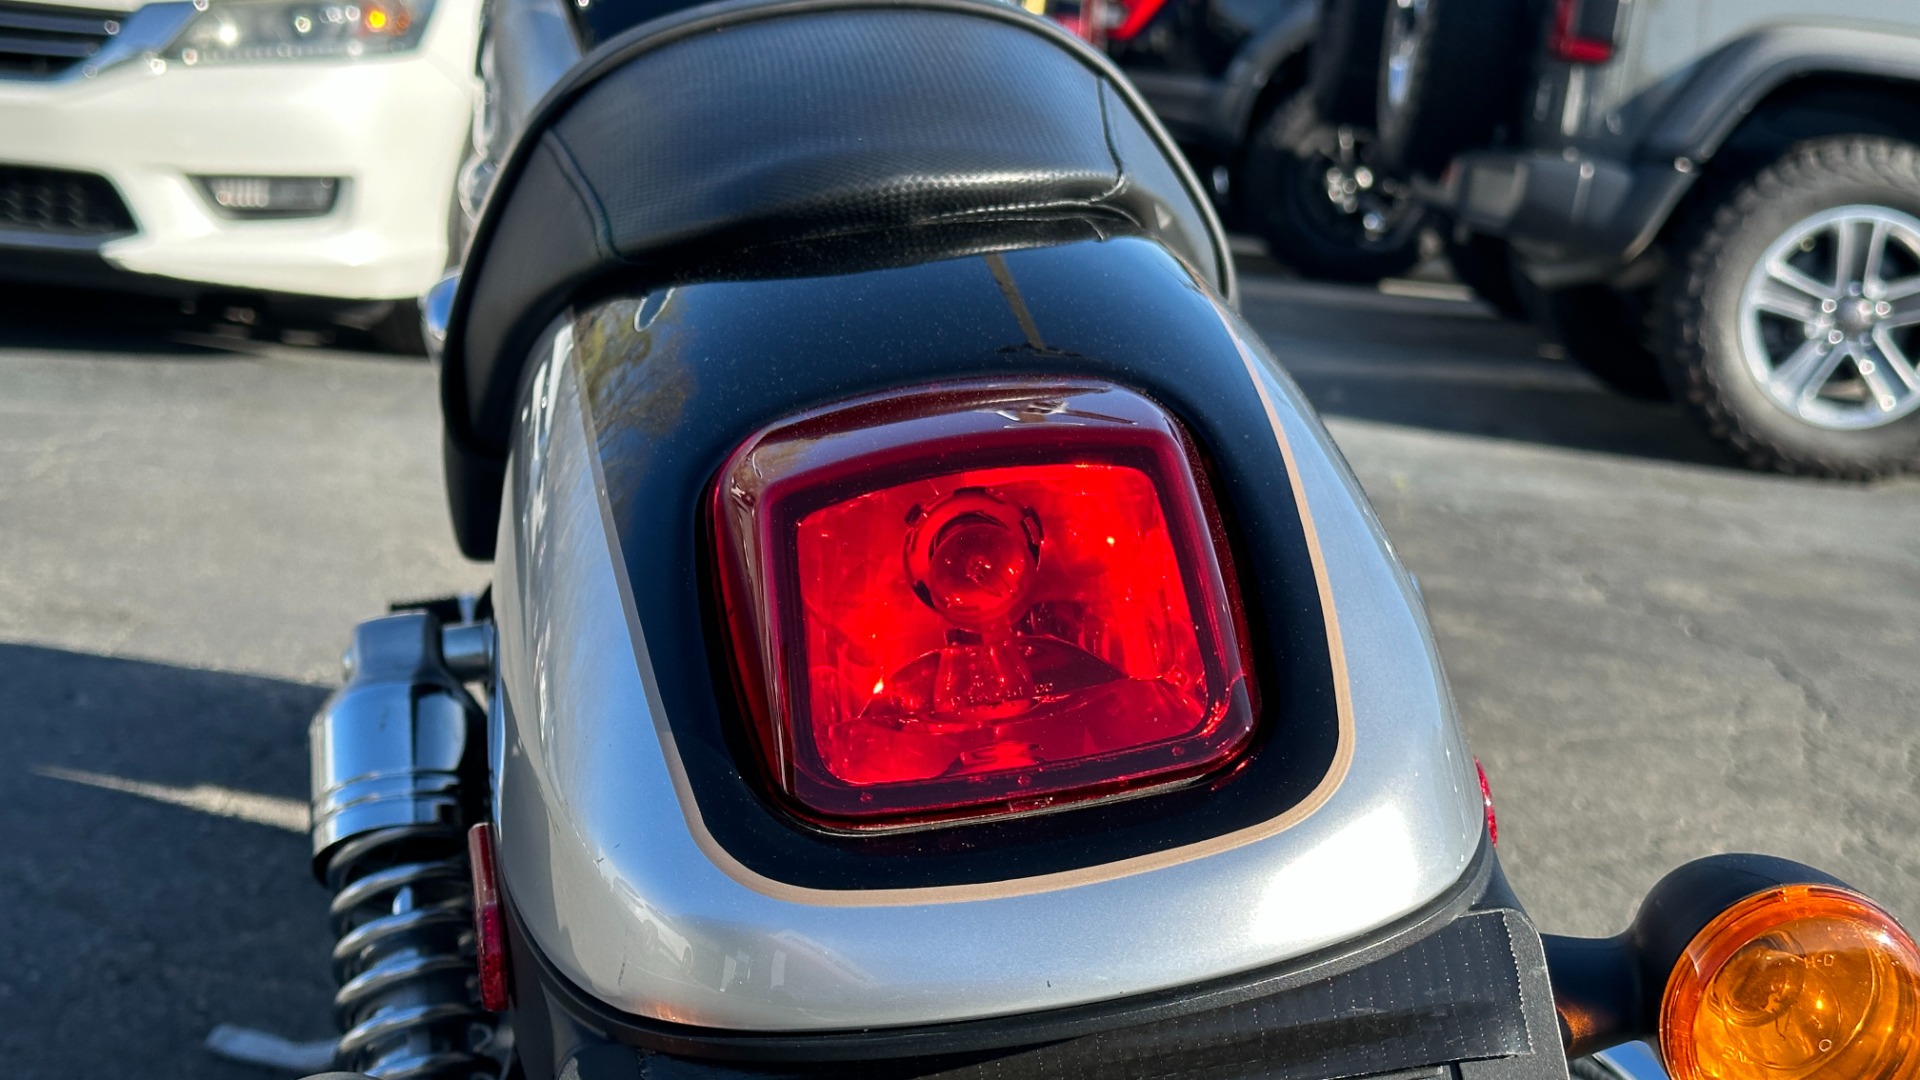 Used 2003 Harley Davidson V Rod ANNIVERSARY EDITION / 1130CC ENGINE / BREMBO BRAKES / VORTEX AIR SCOOPS for sale $7,695 at Formula Imports in Charlotte NC 28227 35